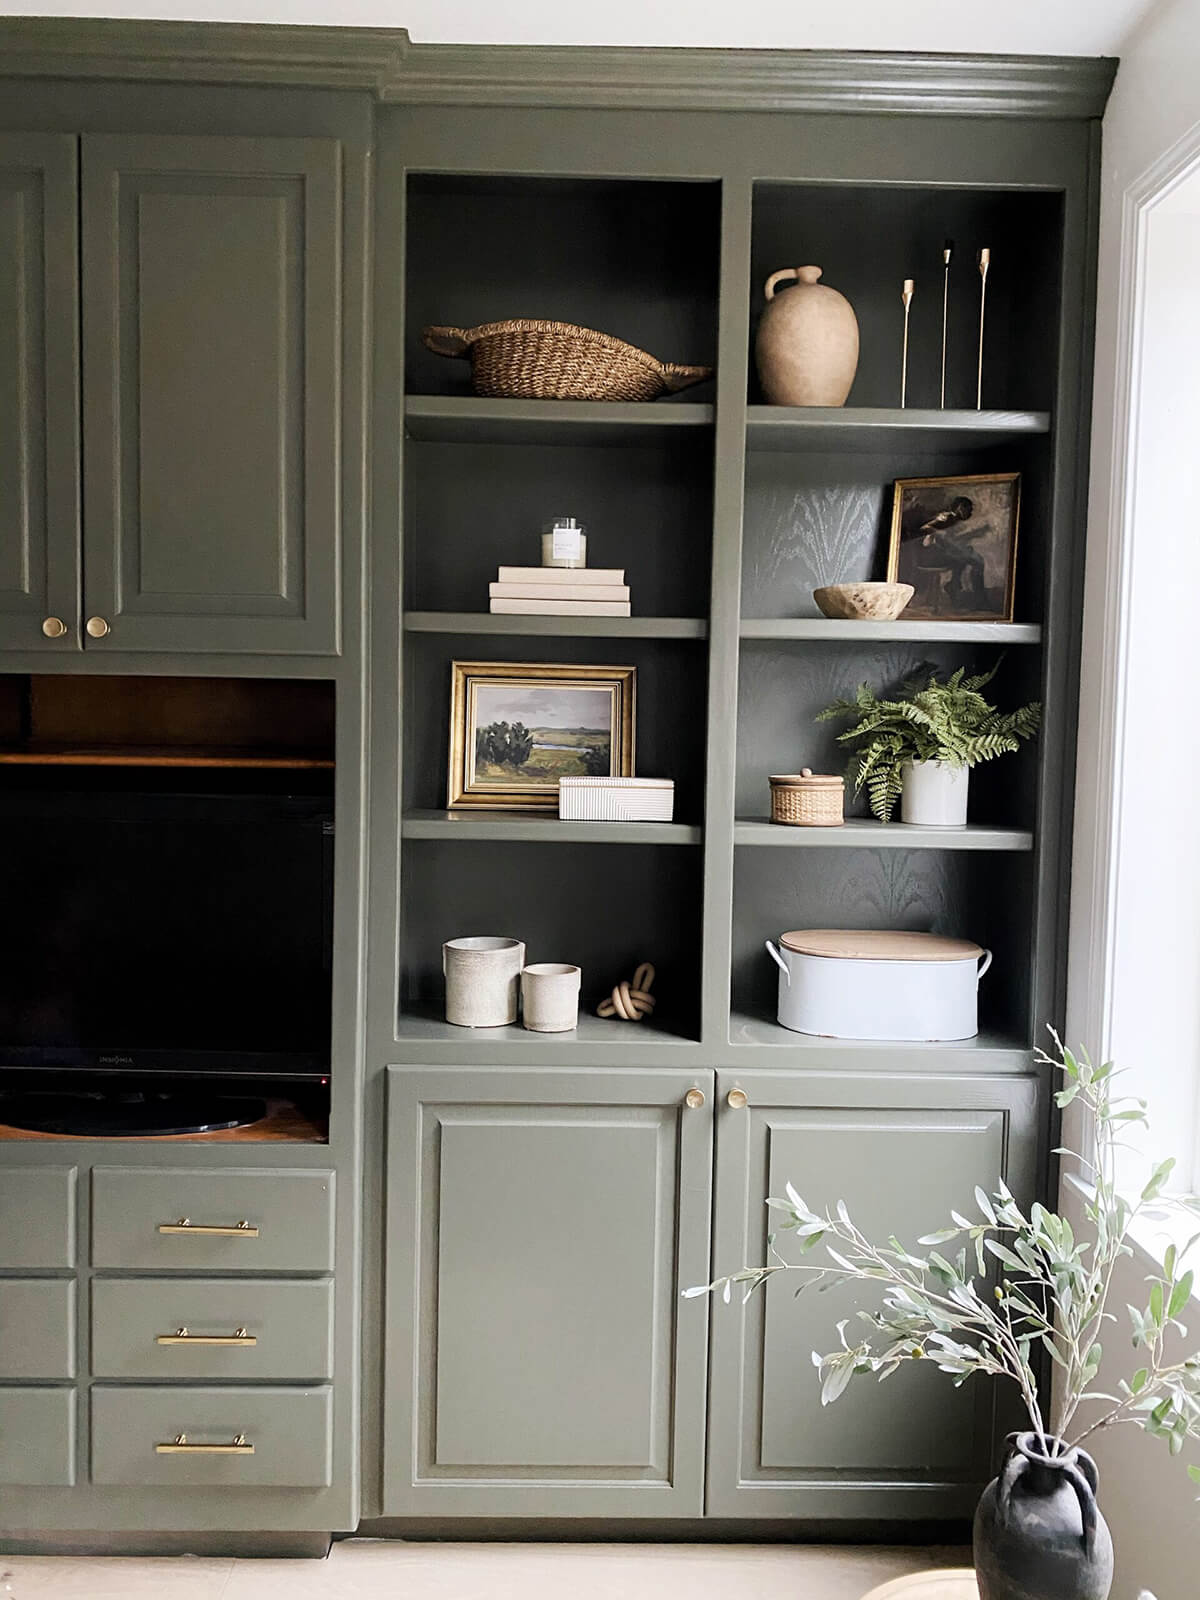 Ripe Olive Green Painted Wooden Cabinets